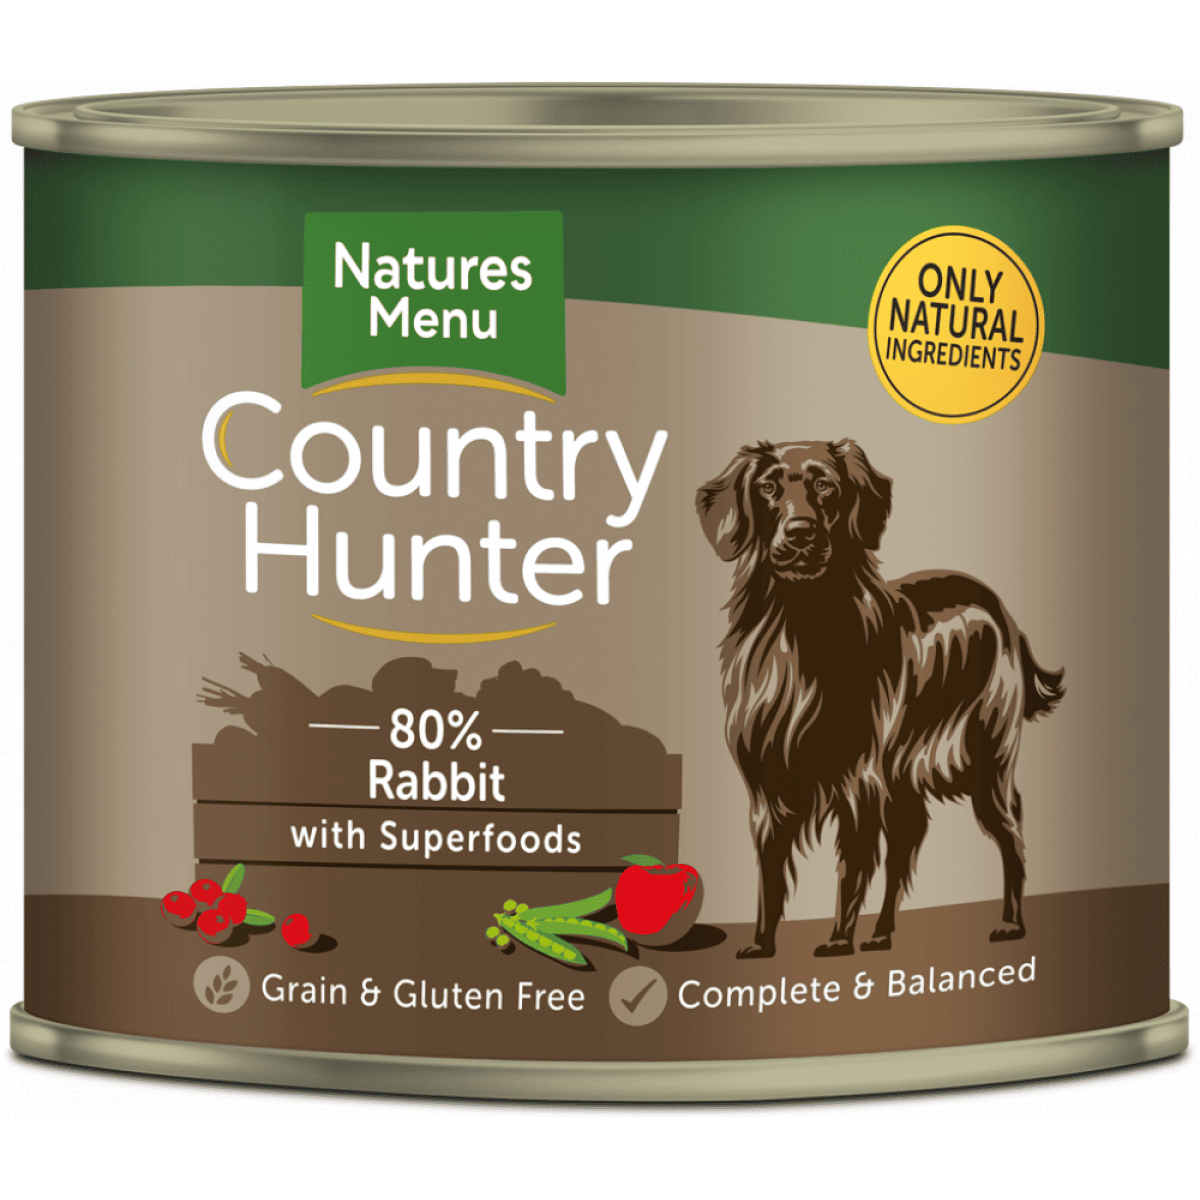 Country Hunter 80% Rabbit 600g – Pawfect Supplies Ltd Product Image